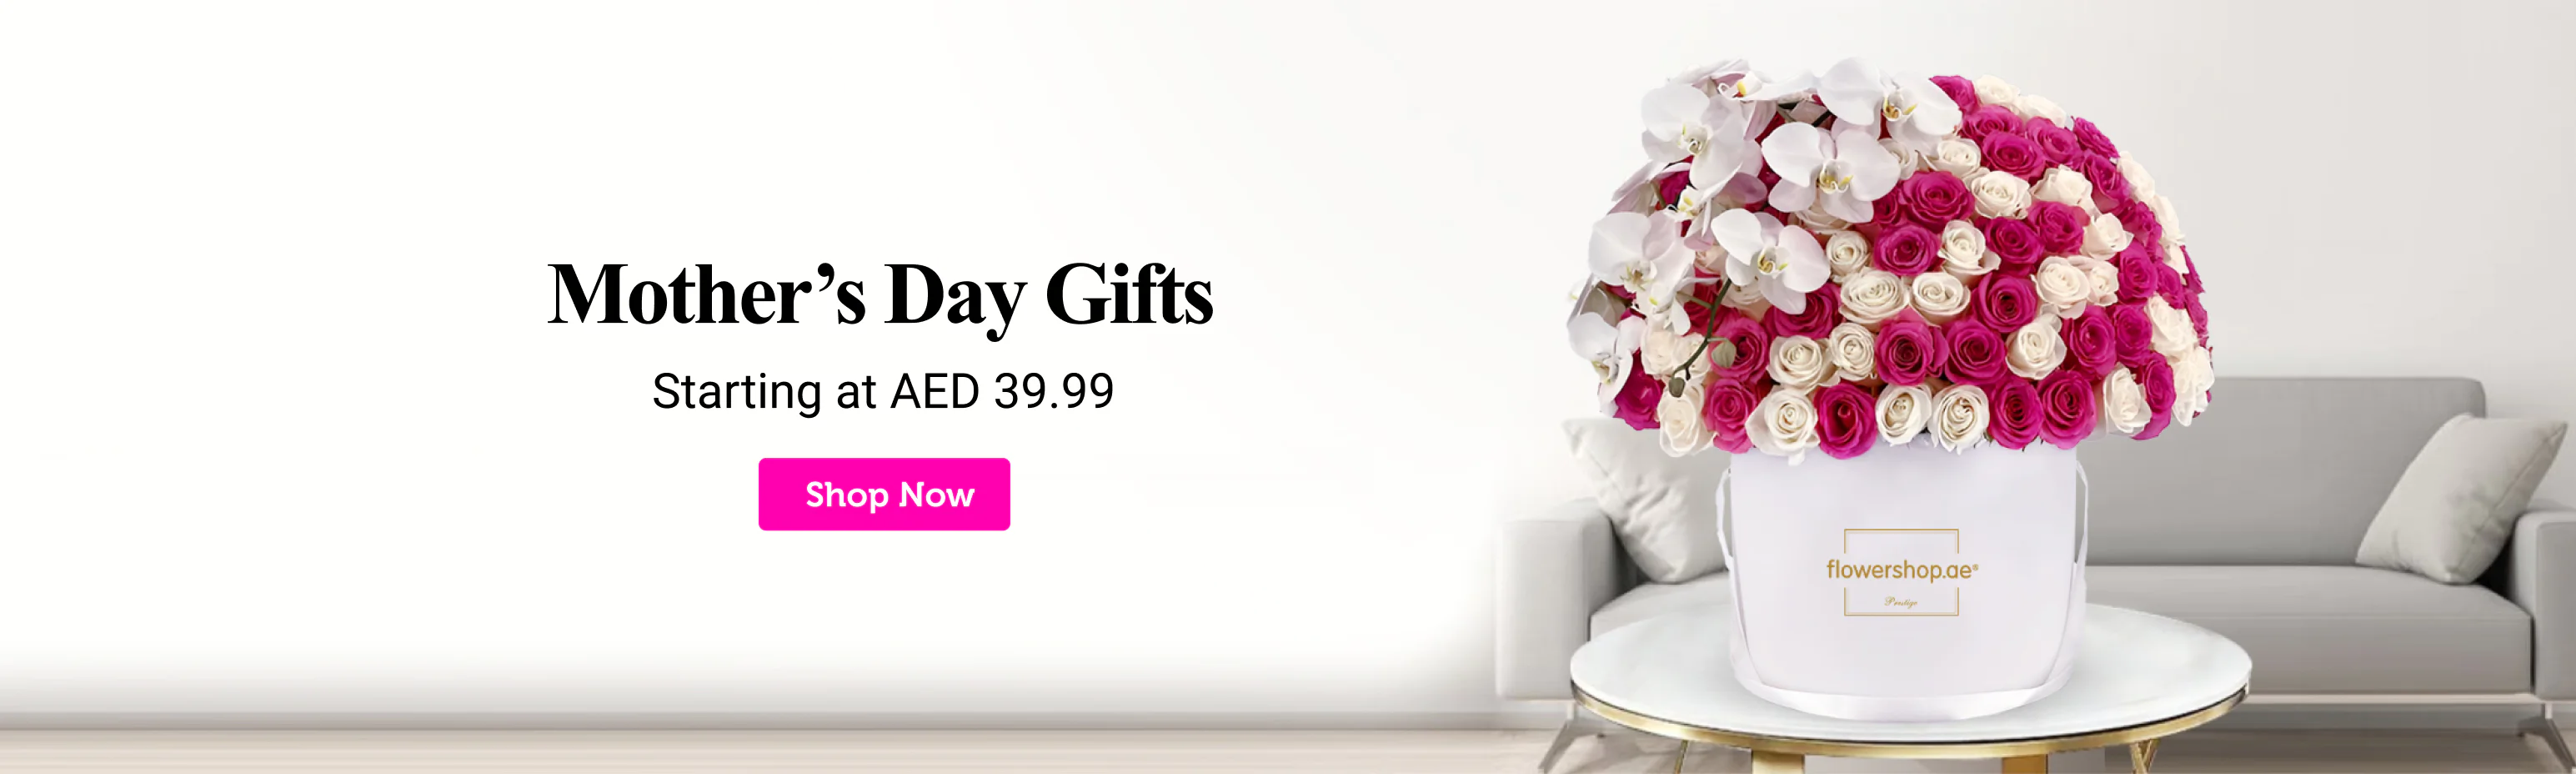 mother's day gifts flowershop